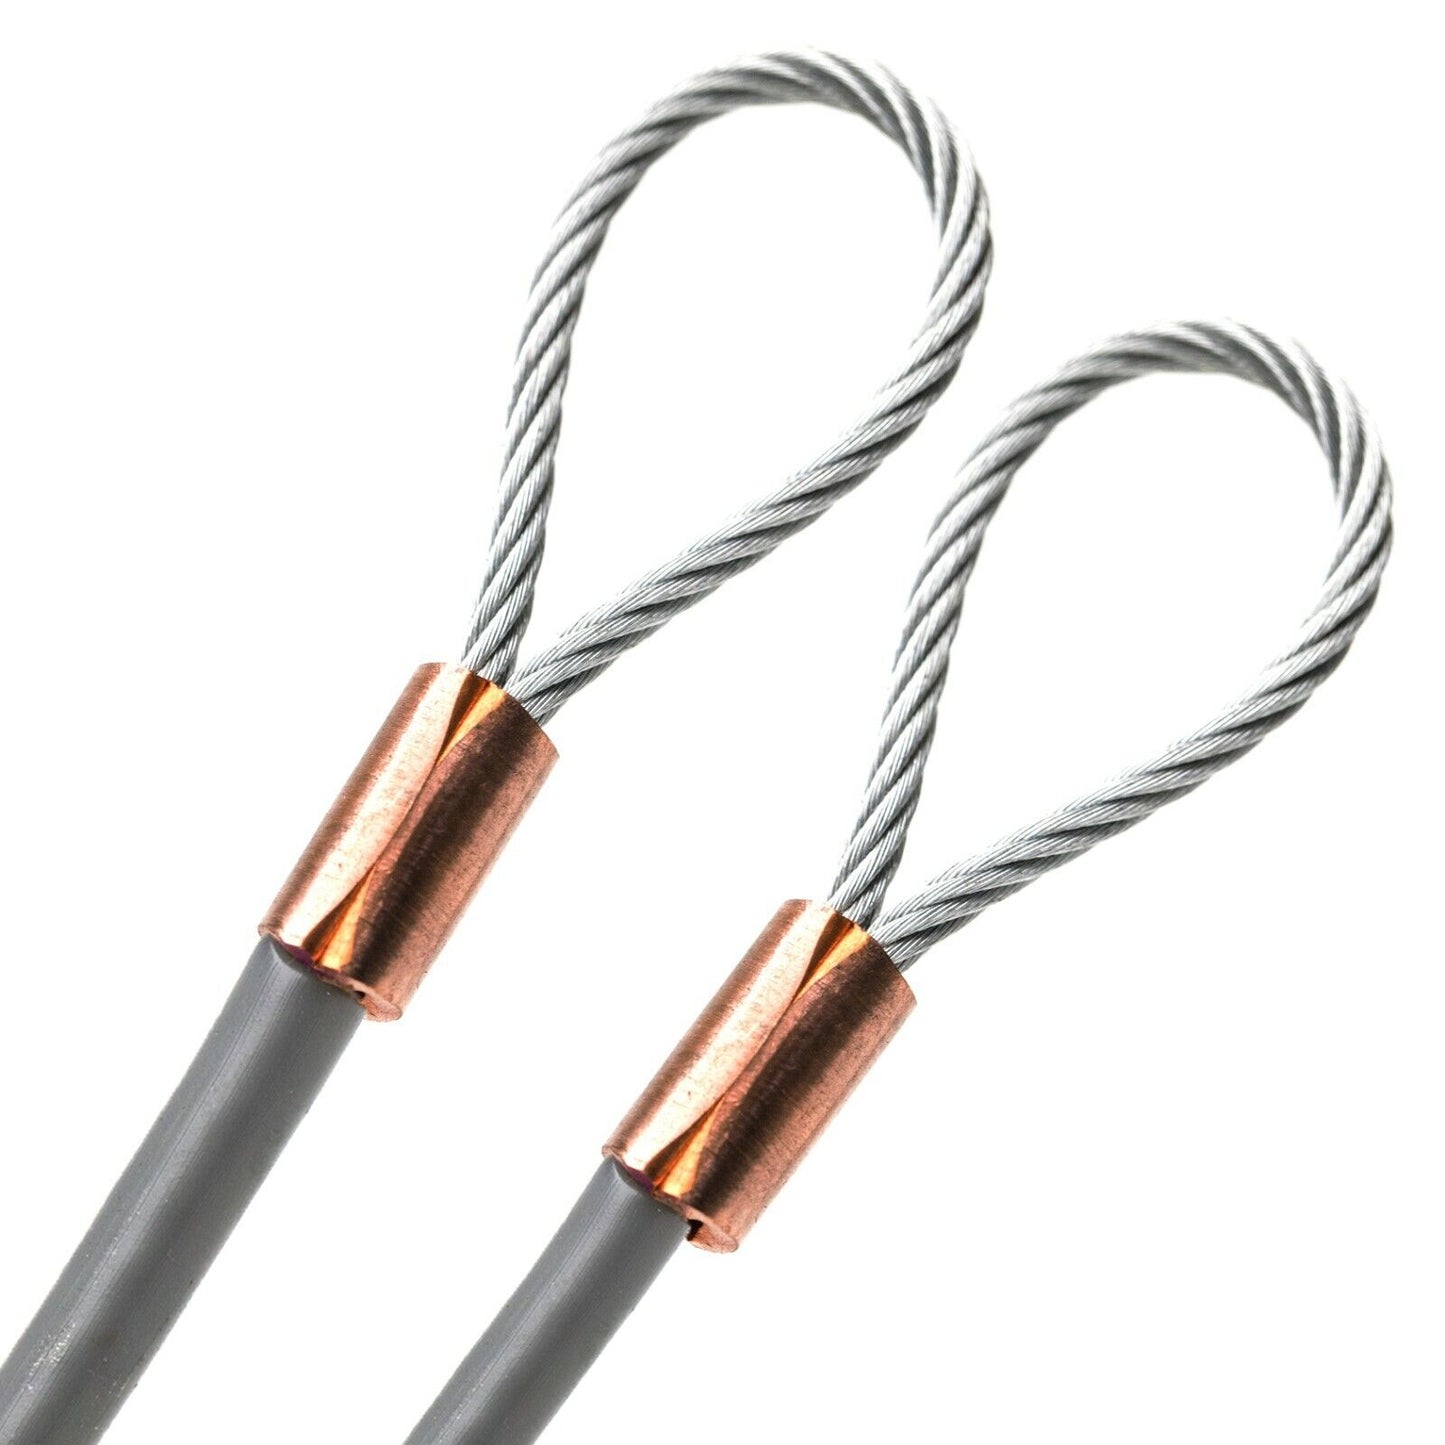 1-100ft Cut To Size 1/4 Galvanized Steel Cable GRAY Vinyl Coated To 3/16 With Copper Sleeves MADE IN USA